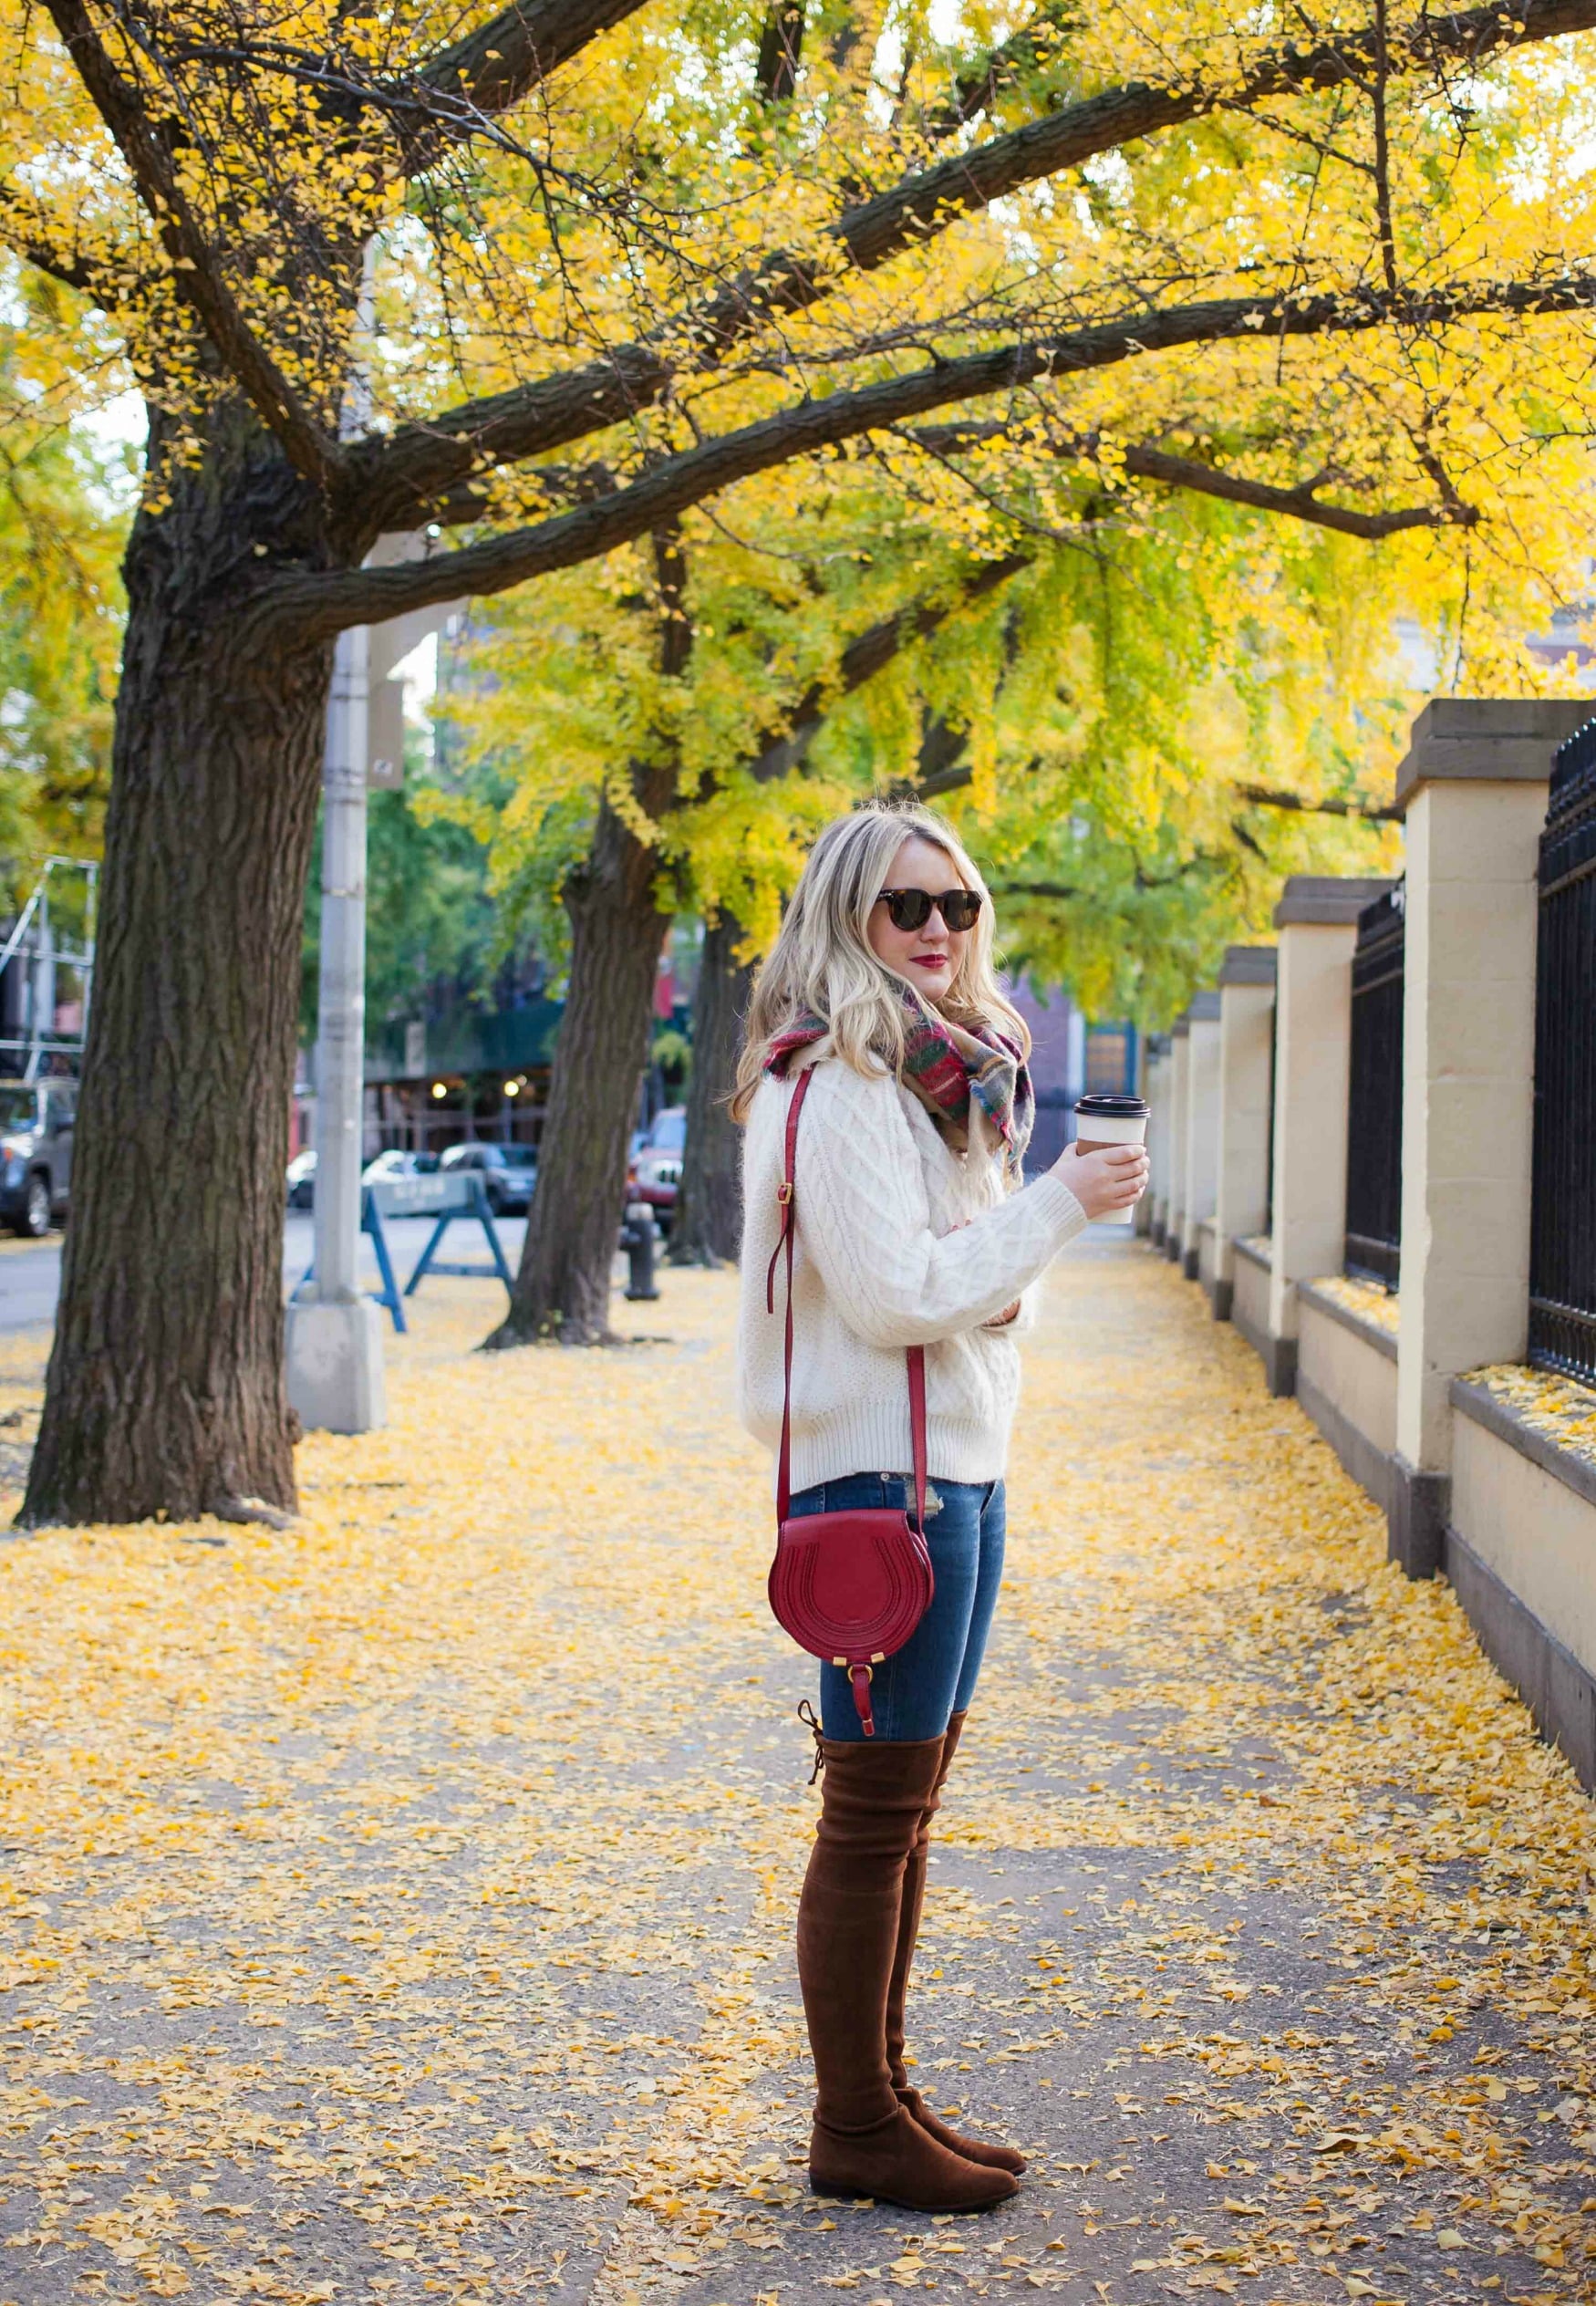 Classic Fall Style I My Favorite Posts About New York City